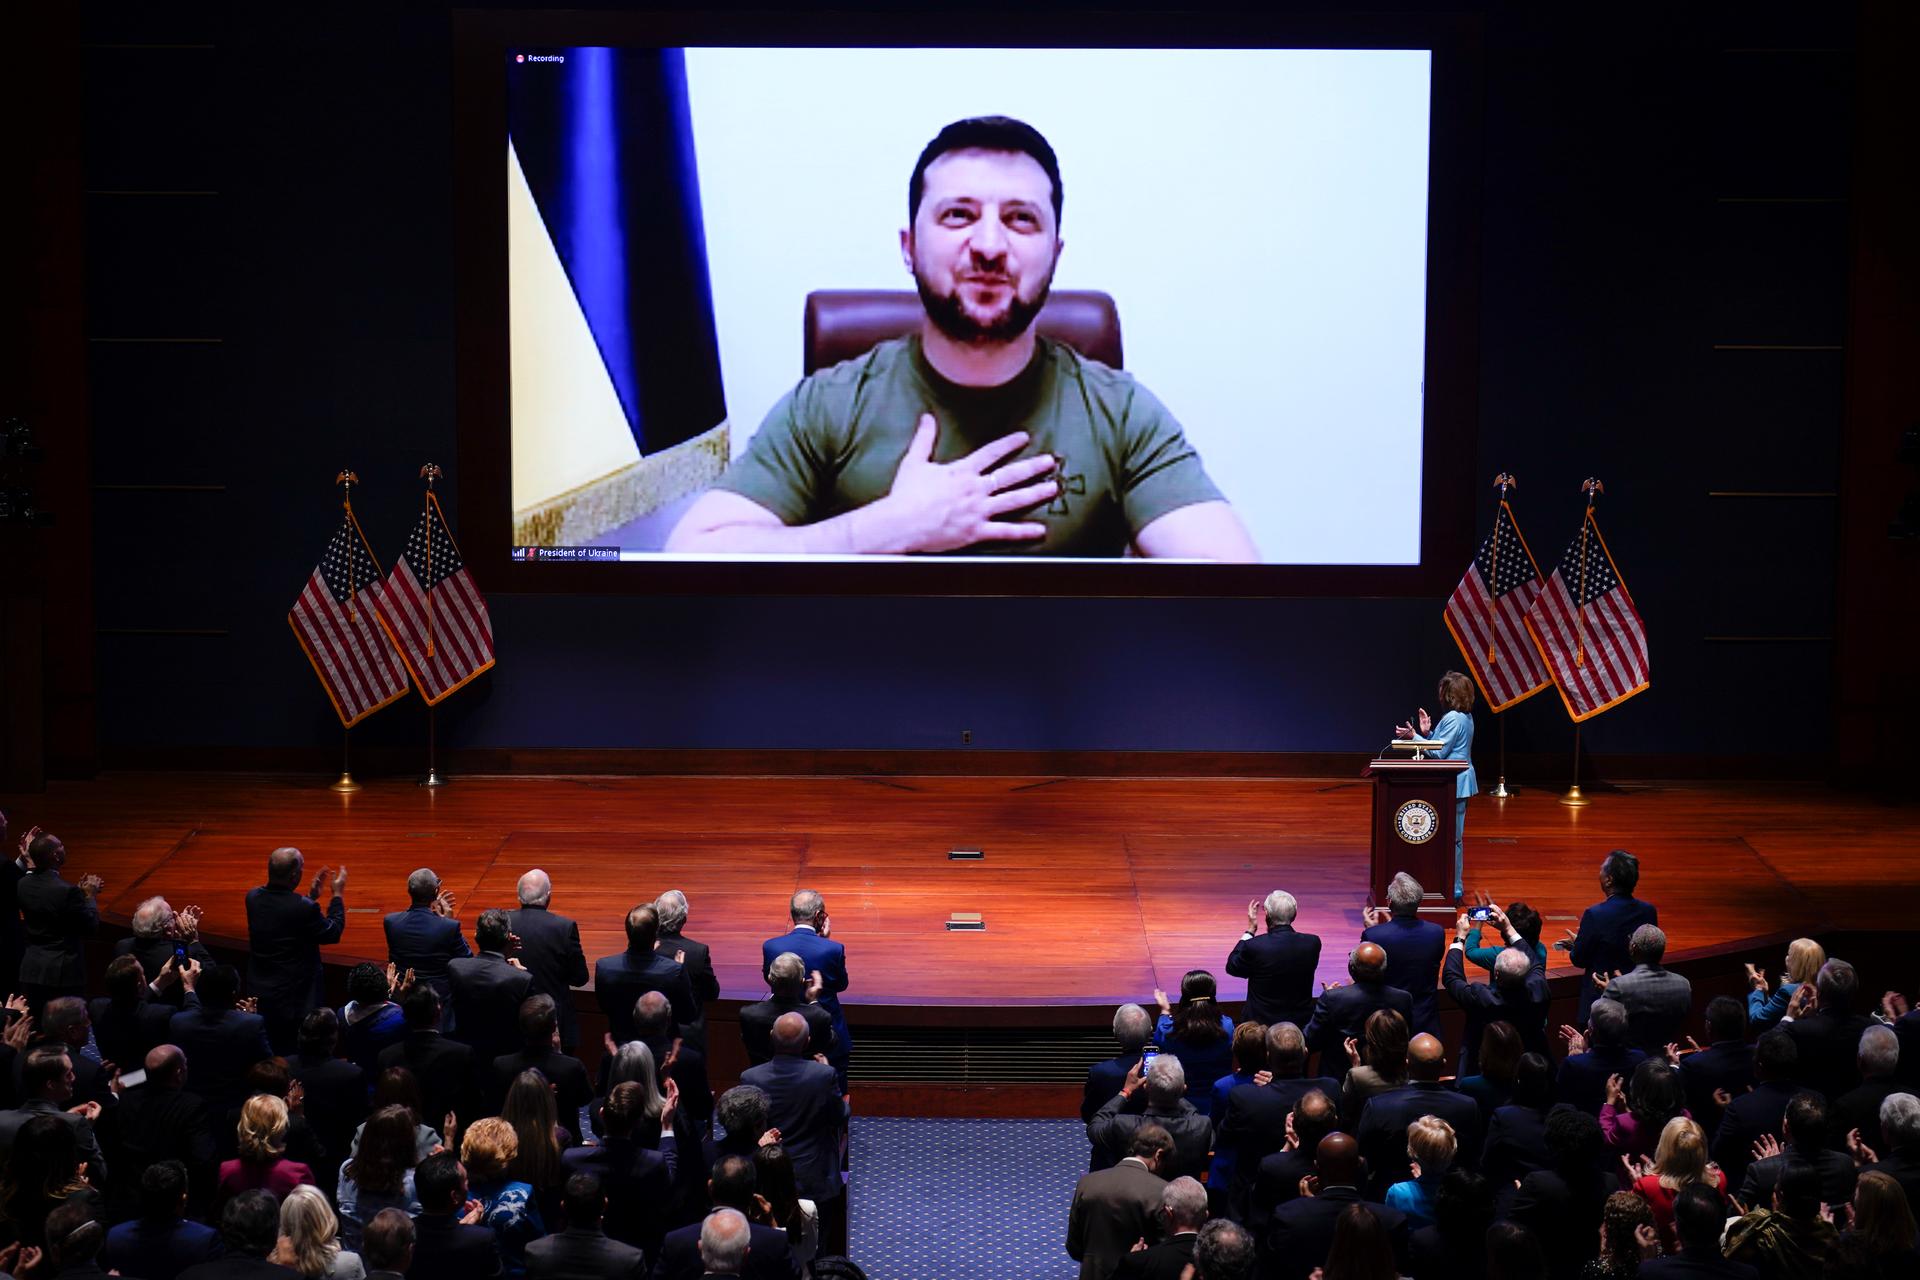 President Zelenskyy wearing a green t-shirt looks out of a large screen on the stage and puts his hand on his heart while the US Congress watches